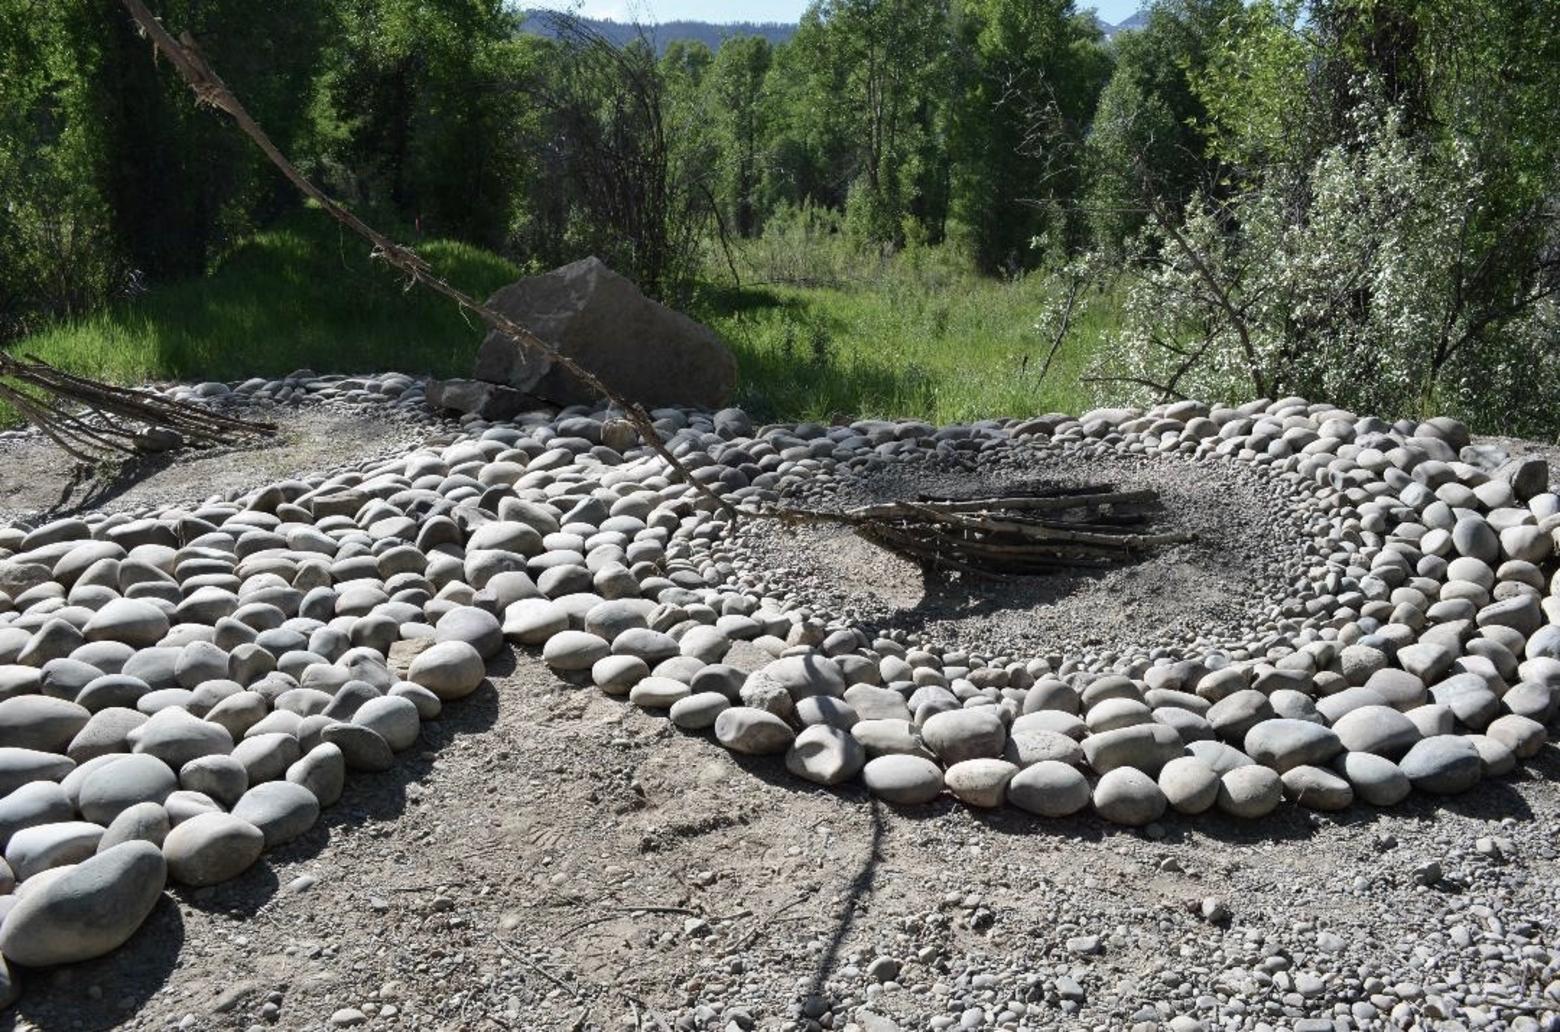  An artful swirl of cobble and soothworn river rock assembled for the opening of Rendezvous Park along the Snake River in Jackson Hole served as a project for Remote Studio students as well as a muse for place-based thinking. It also serves as a venue where visitors can reflect on the elements of "natural architecture" present in the Snake River corridor. In the end, part of the installation, ephemeral by design, will over time be reclaimed by the river during high water—a reminder that long-lasting lessons can be imparted without having to be memorialized by permanent human construction. Photo courtesy Hance Hughes. 